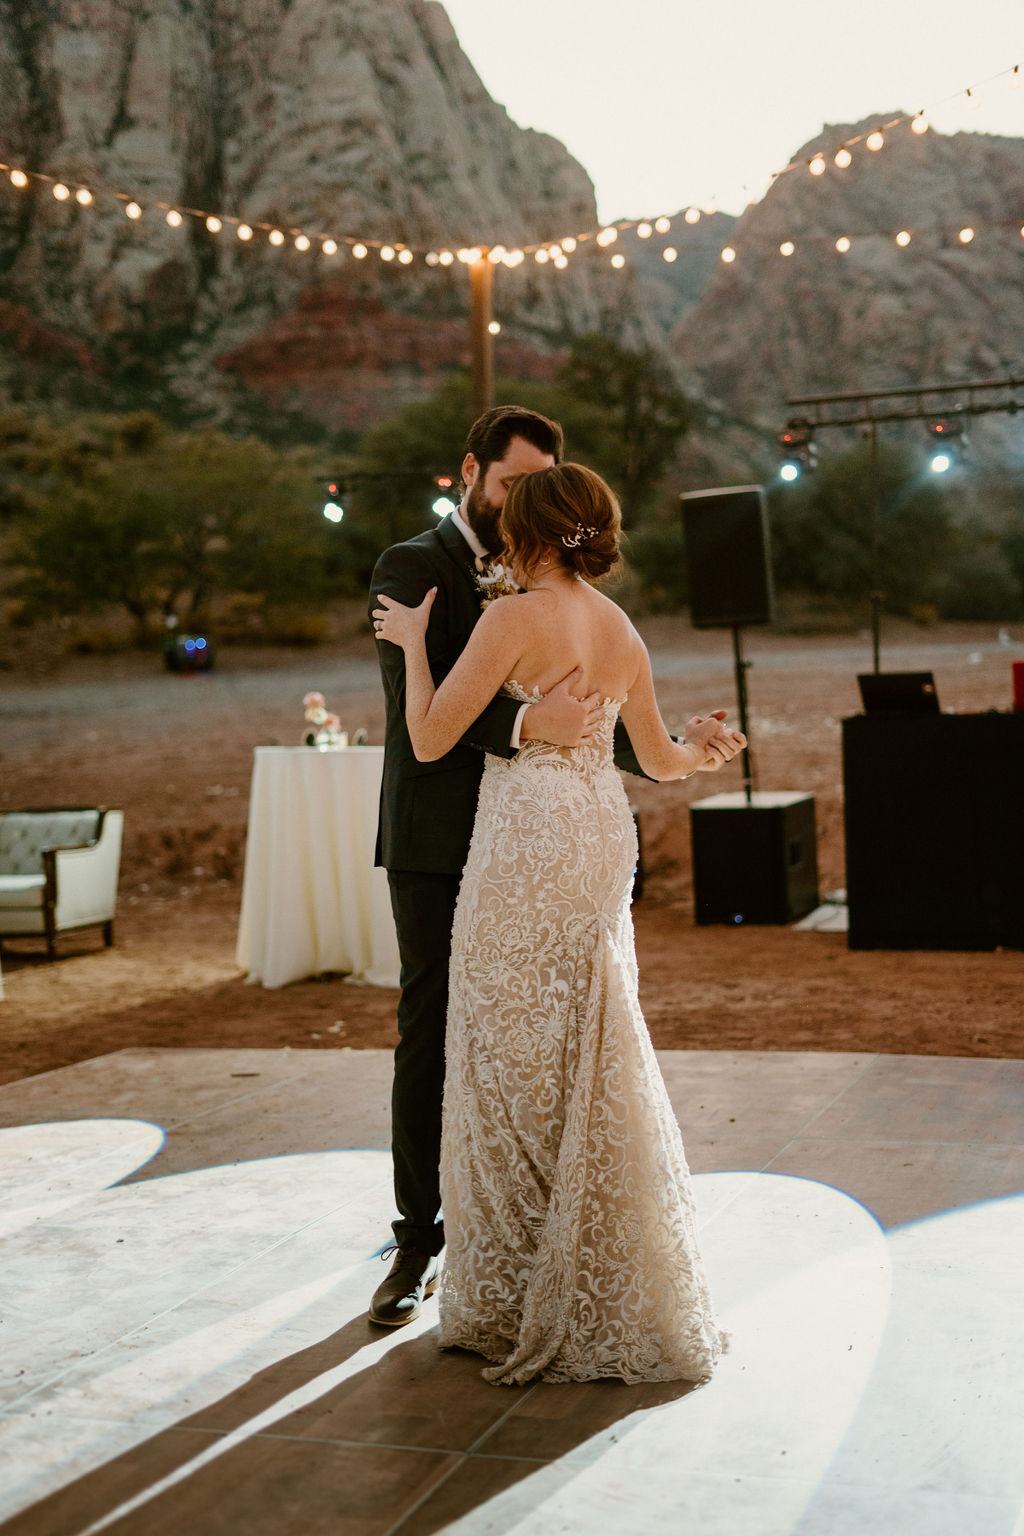 A couple in formal attire sharing a dance outdoors at sunset, with string lights and mountains in the background.